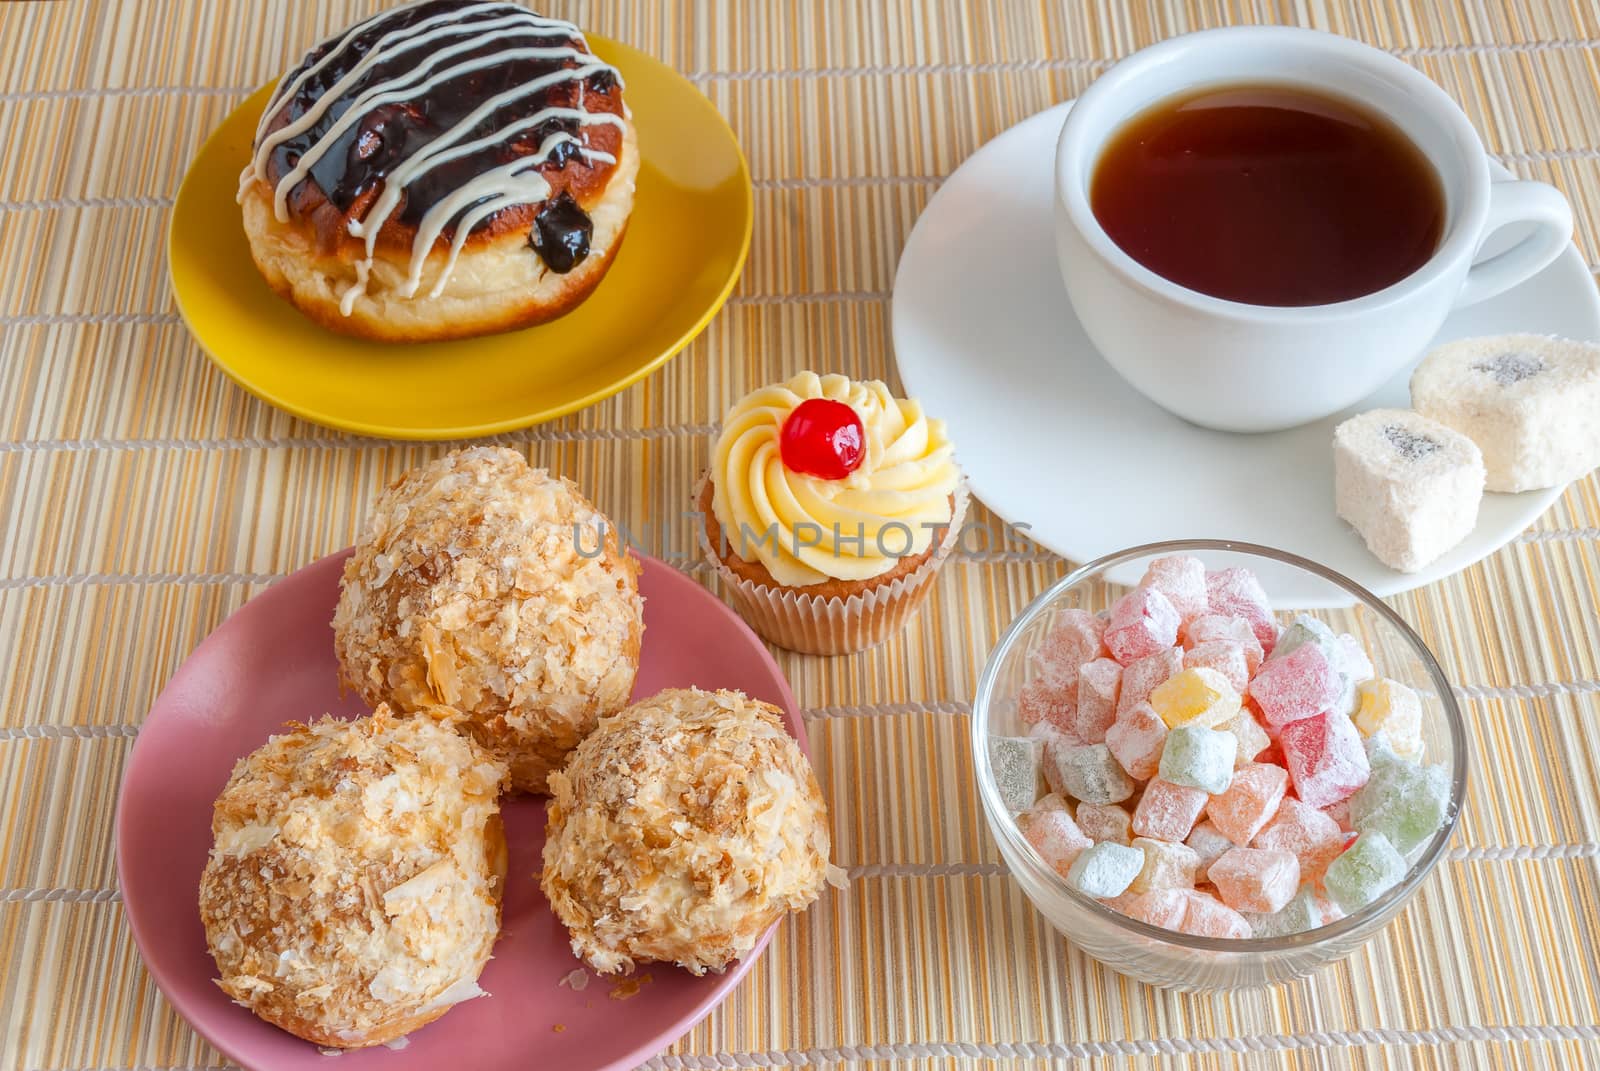 Tea, fresh cherry muffin, colorful delight, eclair and doughnut, various tasty sweet dessert